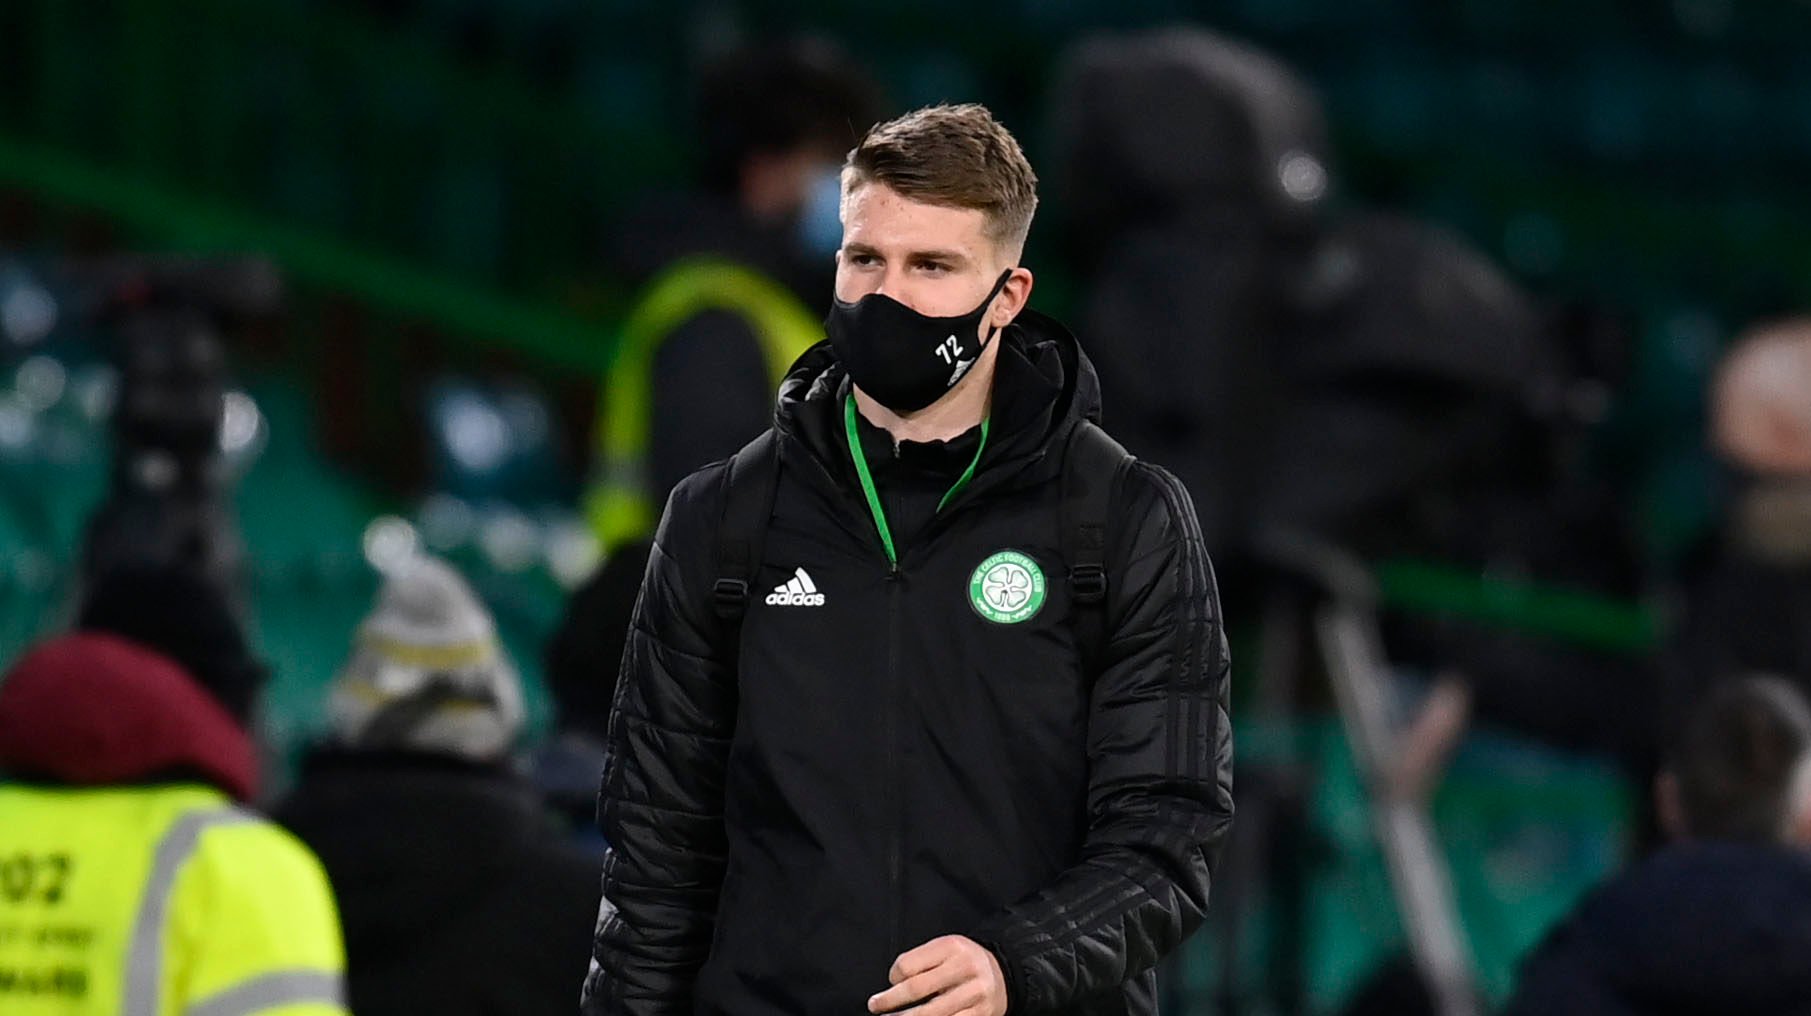 Leo Hjelde now has a great chance to show he's part of Celtic's future